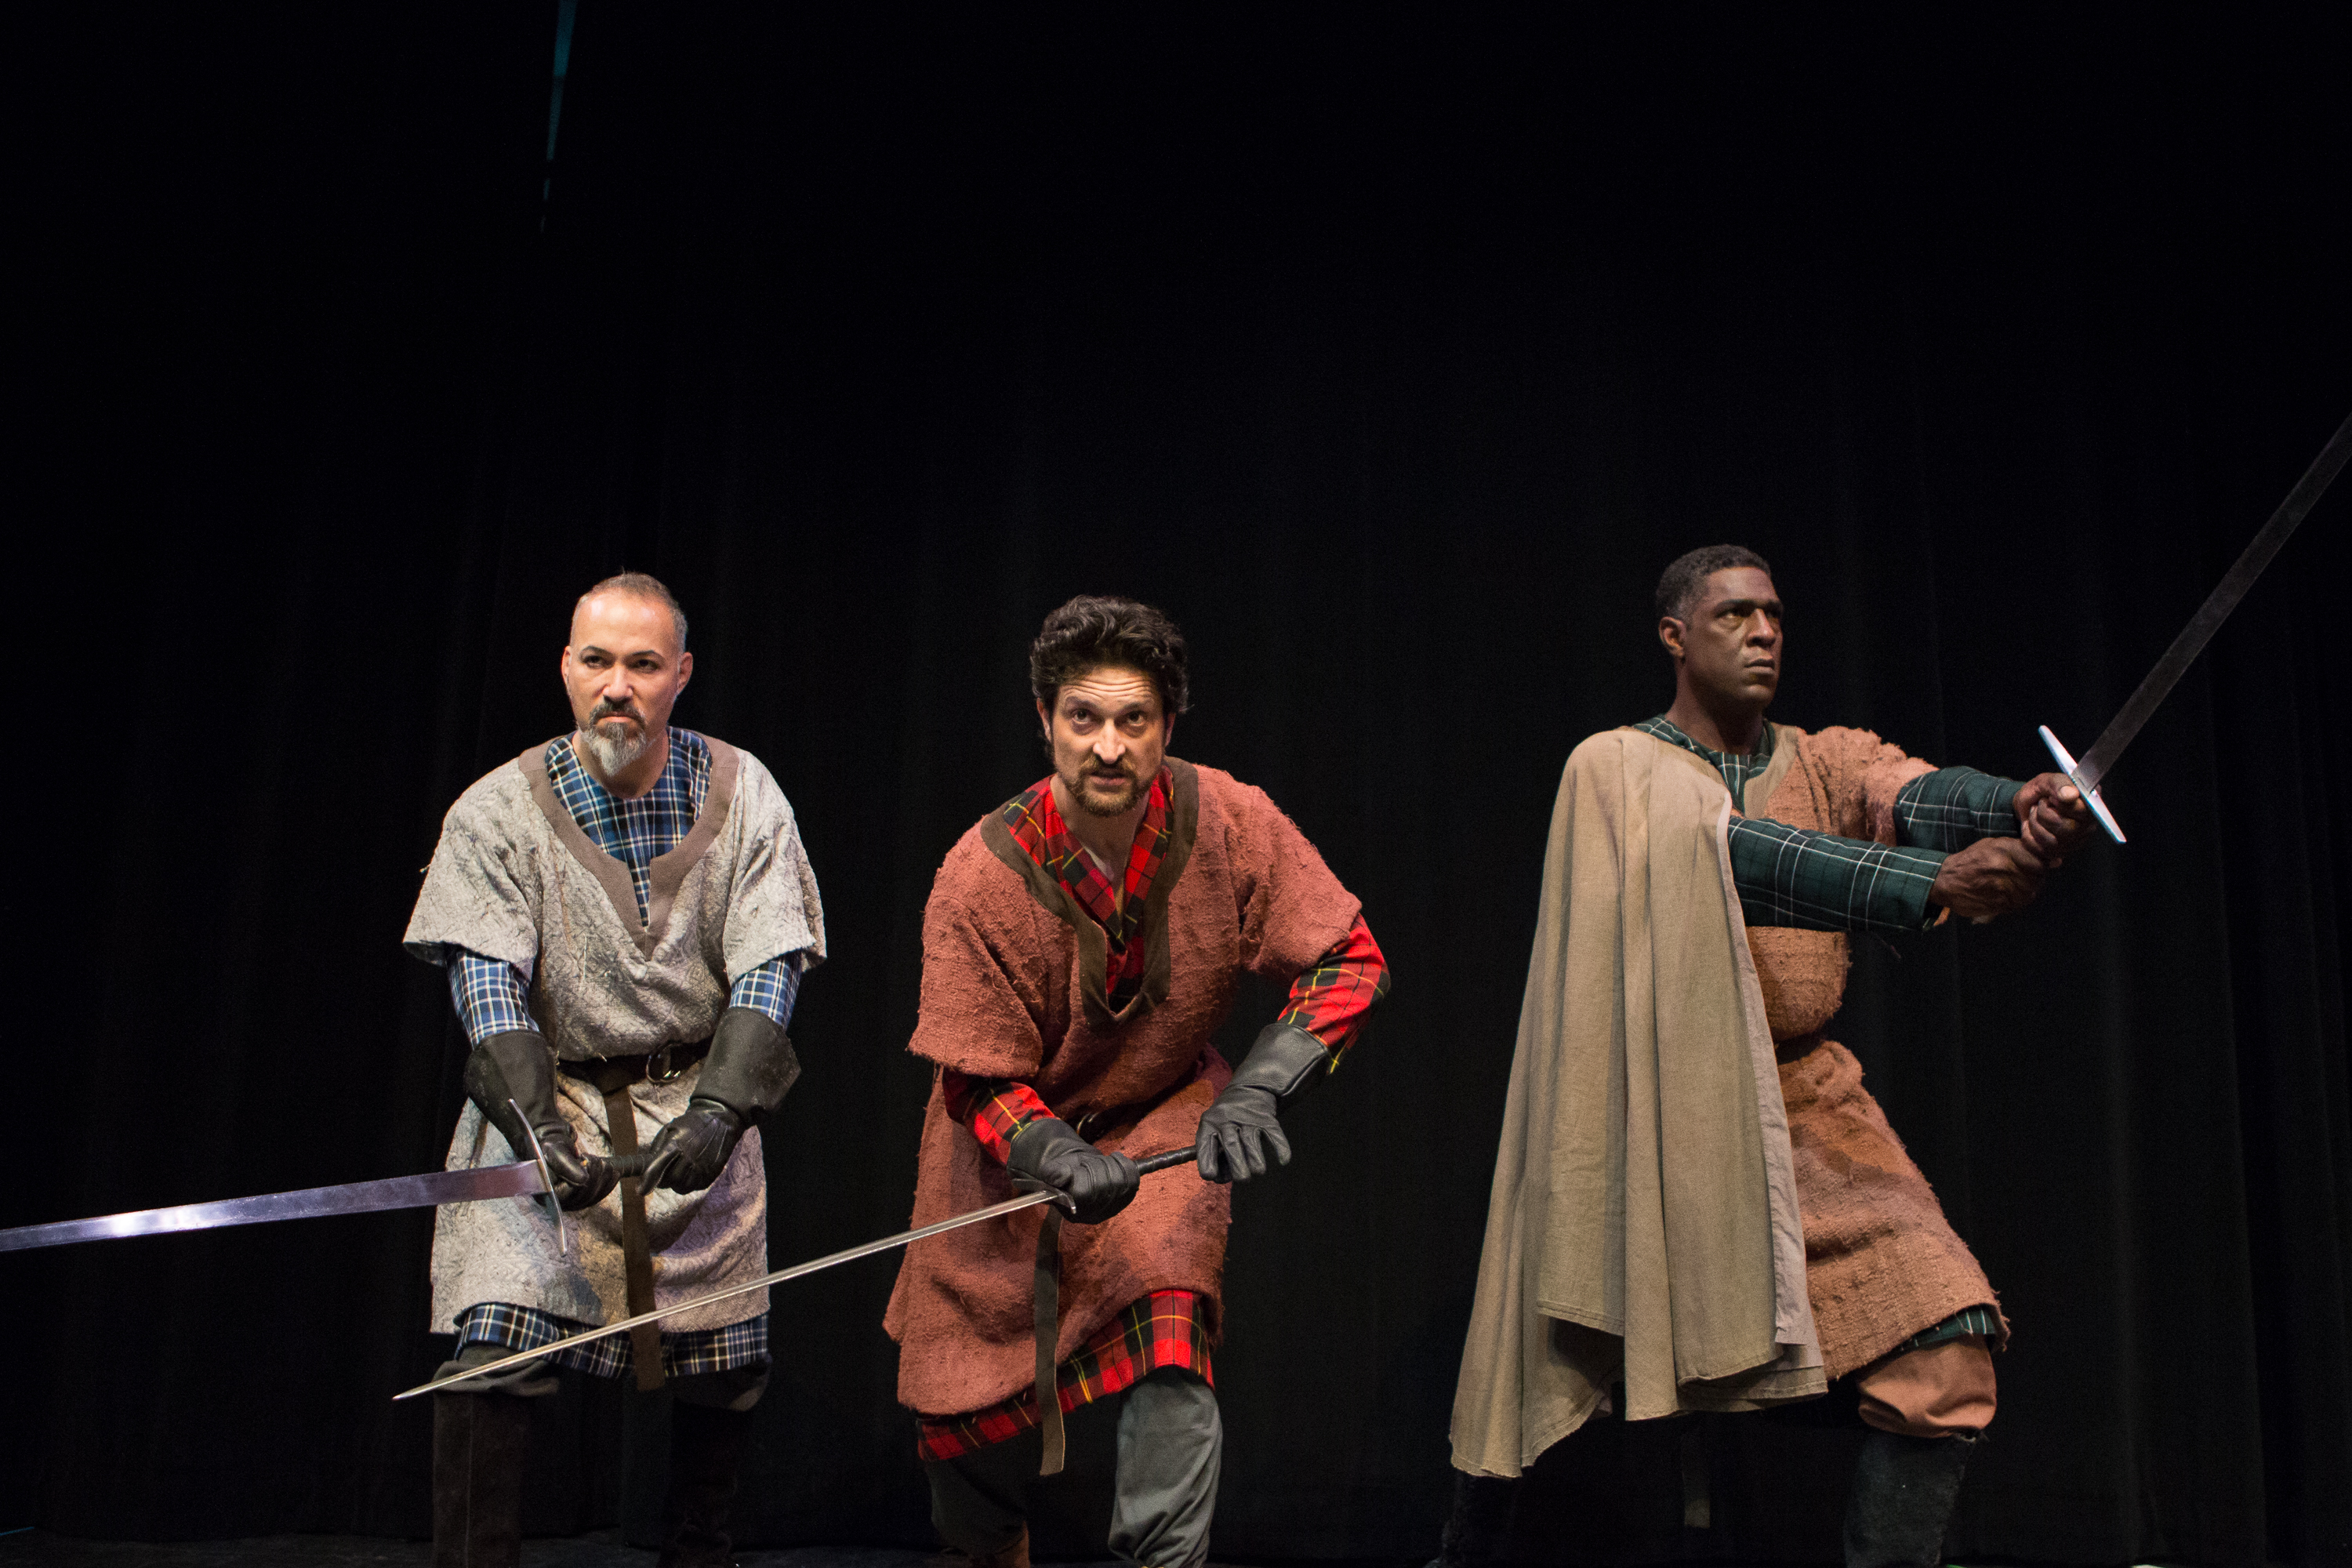 An image from the 2014 Houston Shakespeare Festival at the University of Houston. (Image Courtesy UH)